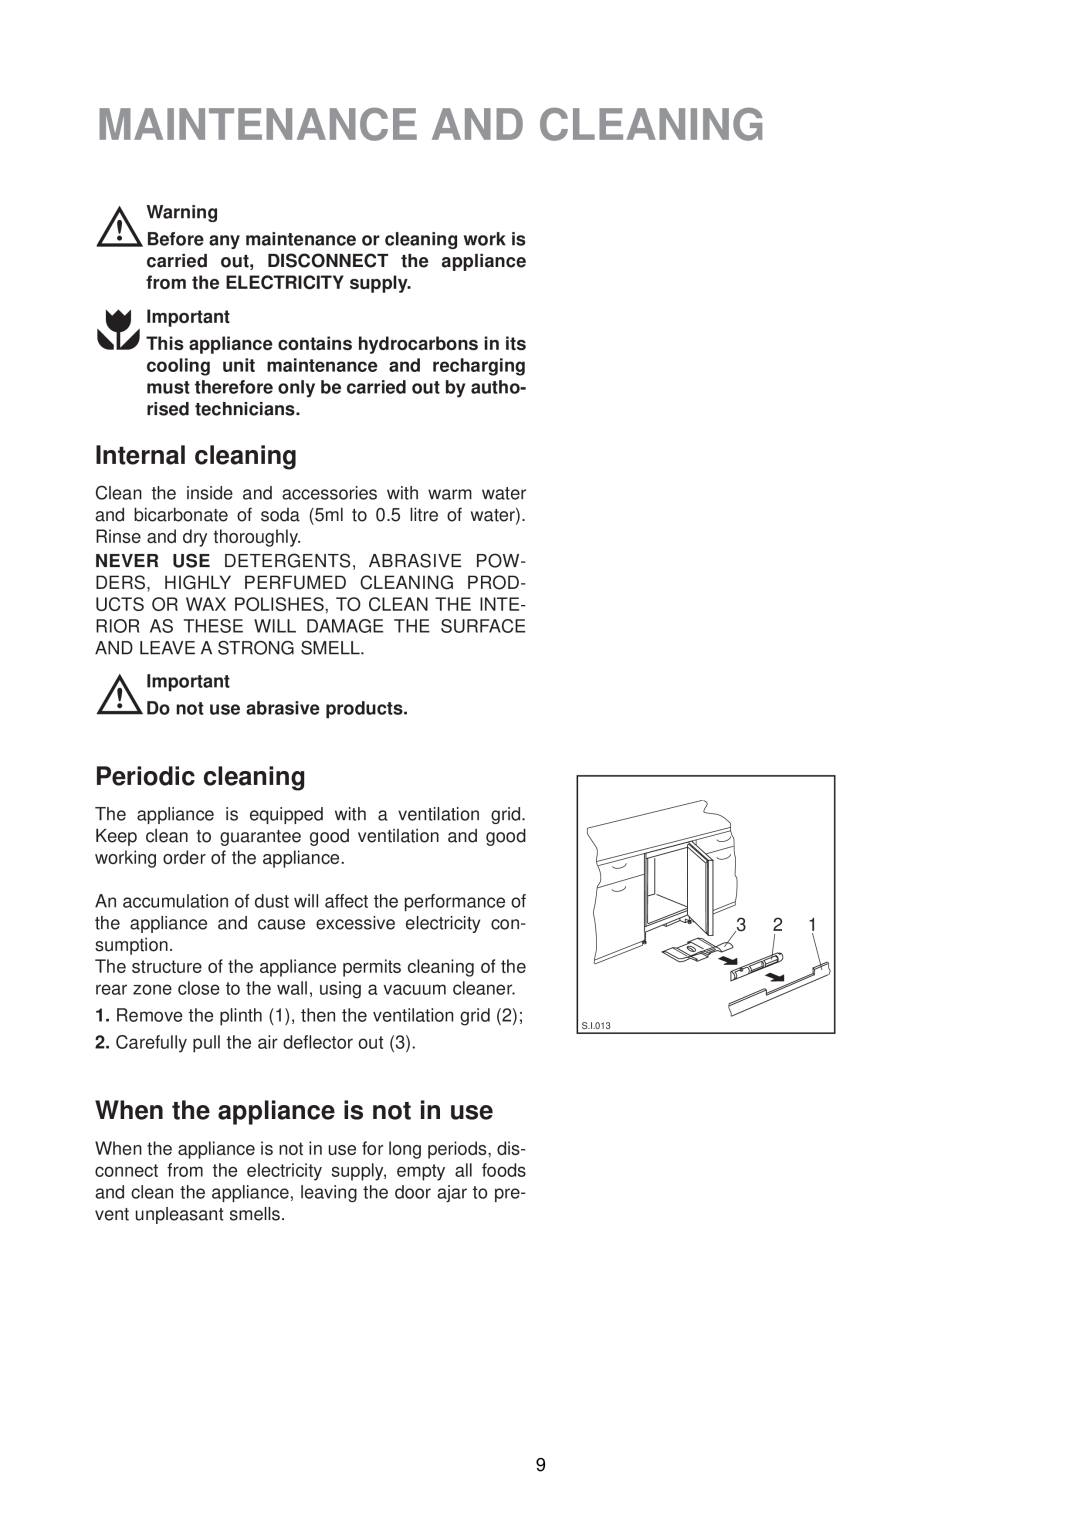 Electrolux EUU 6174 manual Maintenance And Cleaning, Internal cleaning, Periodic cleaning, When the appliance is not in use 